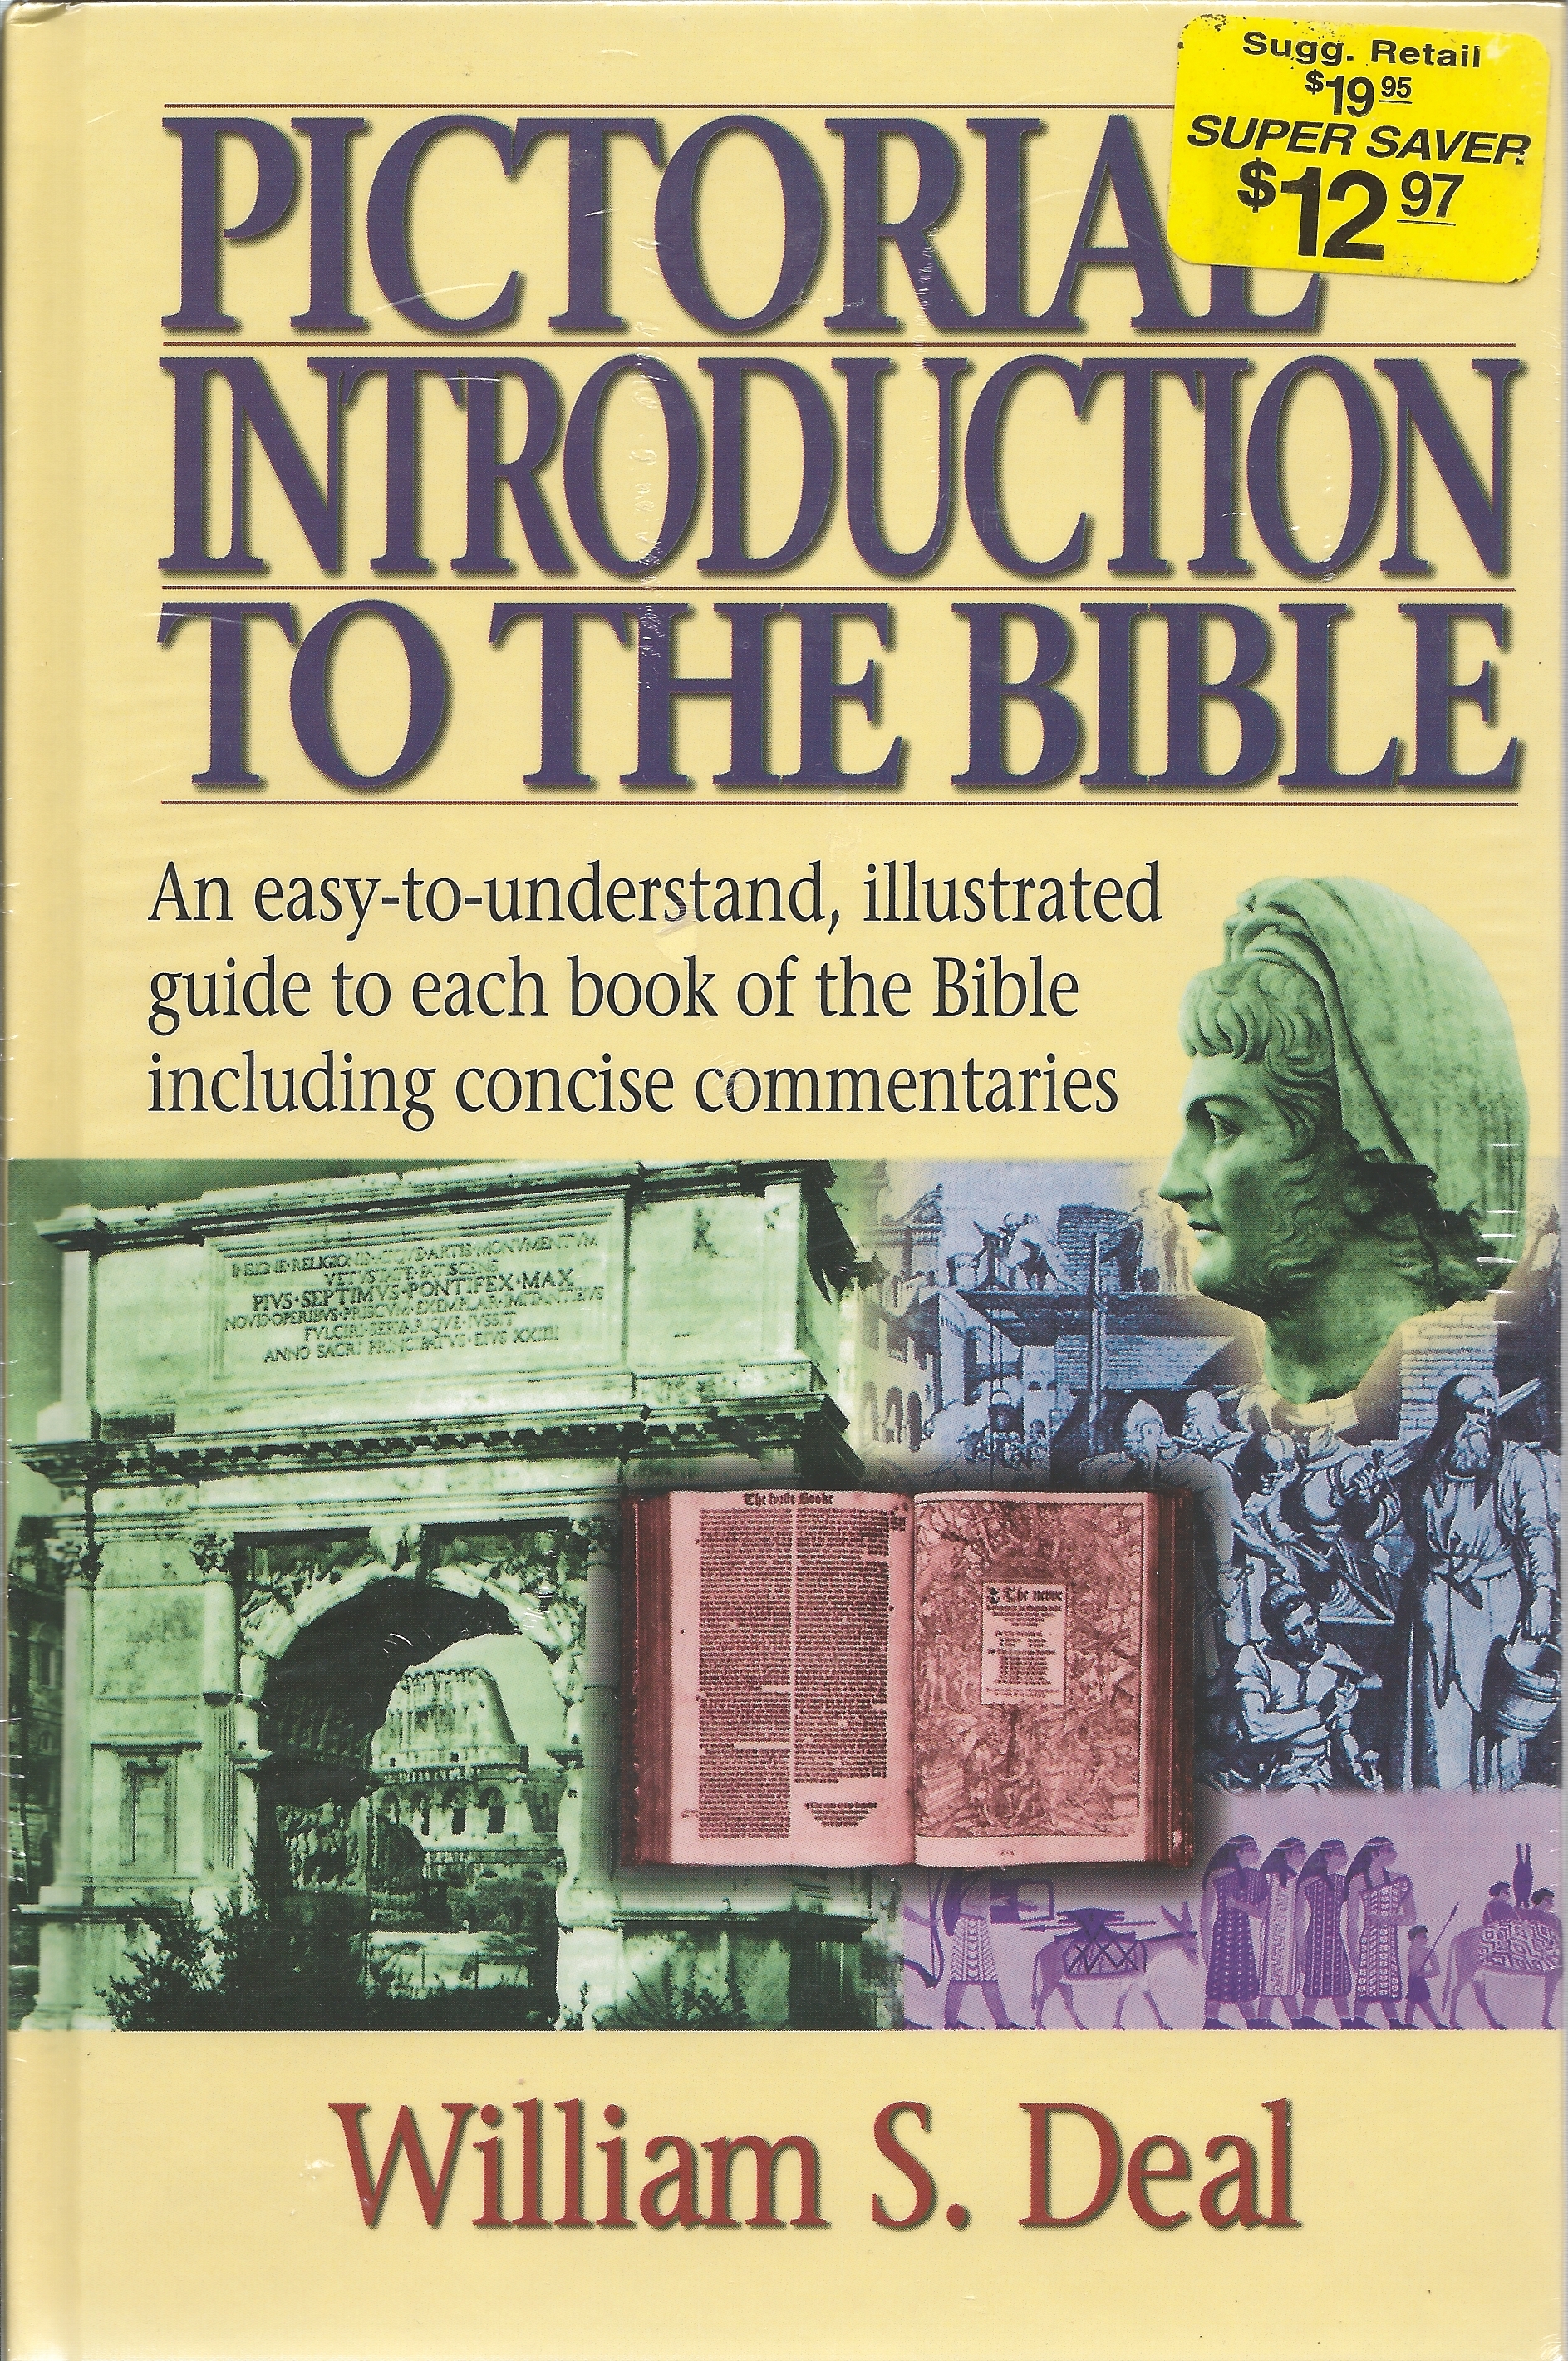 PICTORIAL INTRODUCTION TO THE BIBLE WIlliam Deal